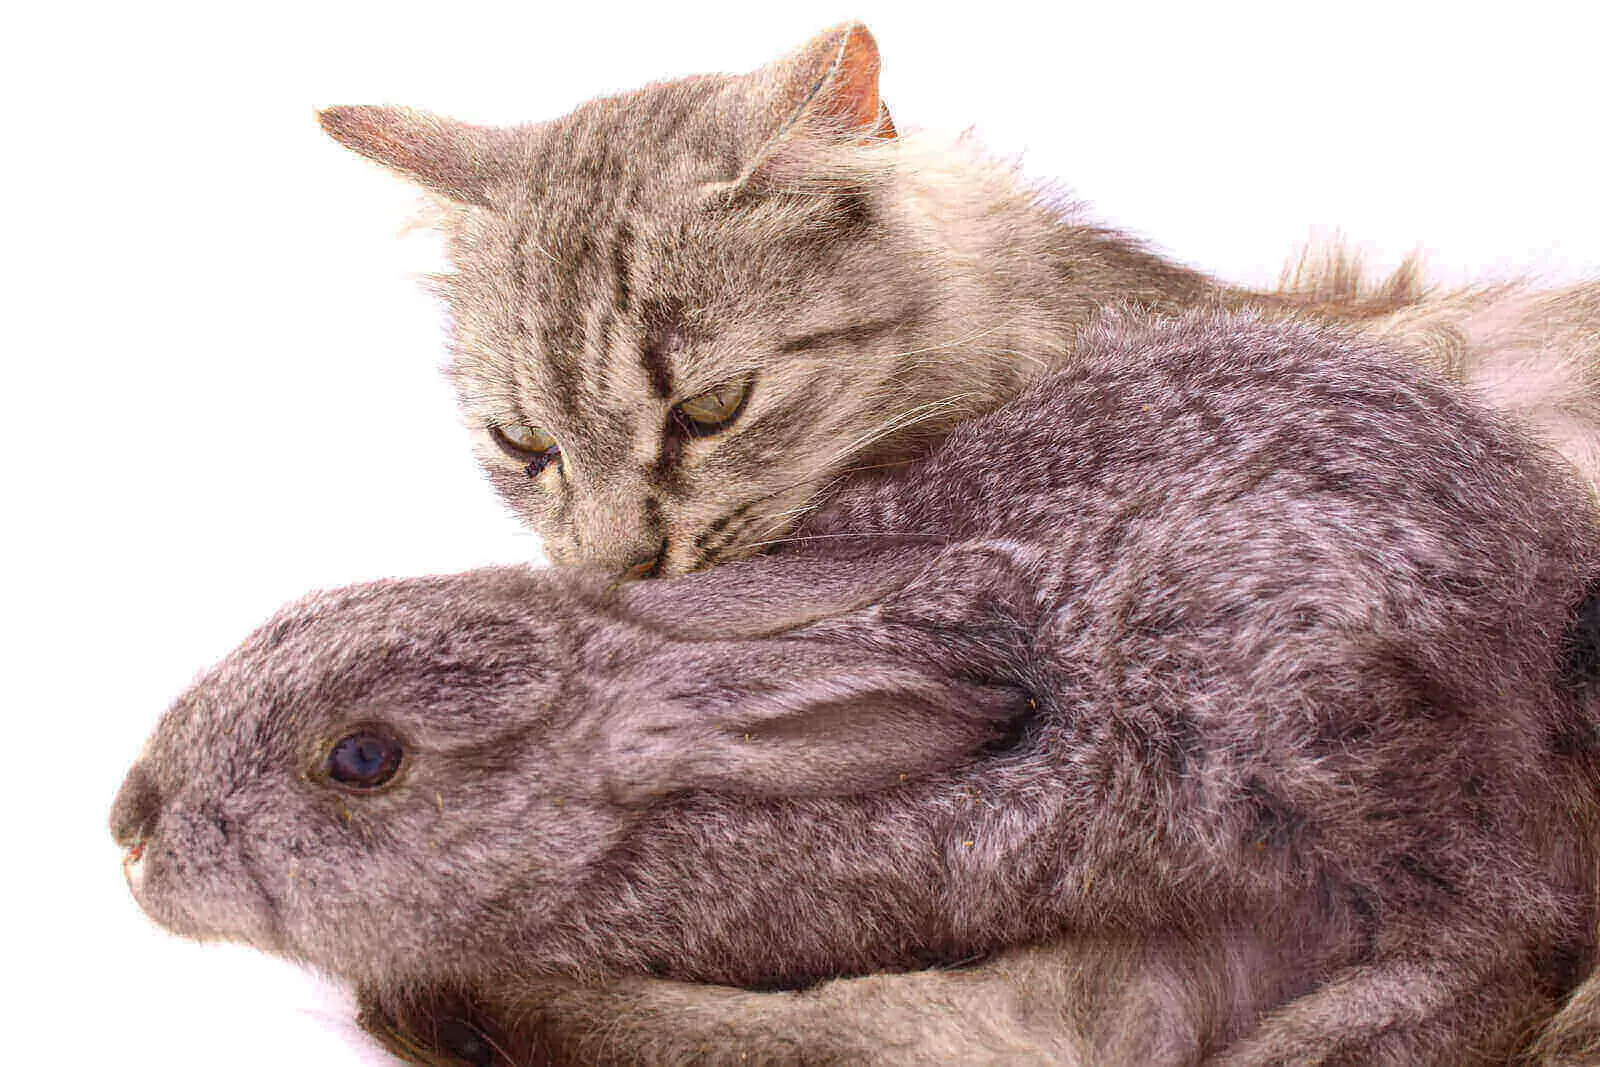 Do Cats Eat Rabbits? 5 Clear Ways For Cat And Bunny Coexistence